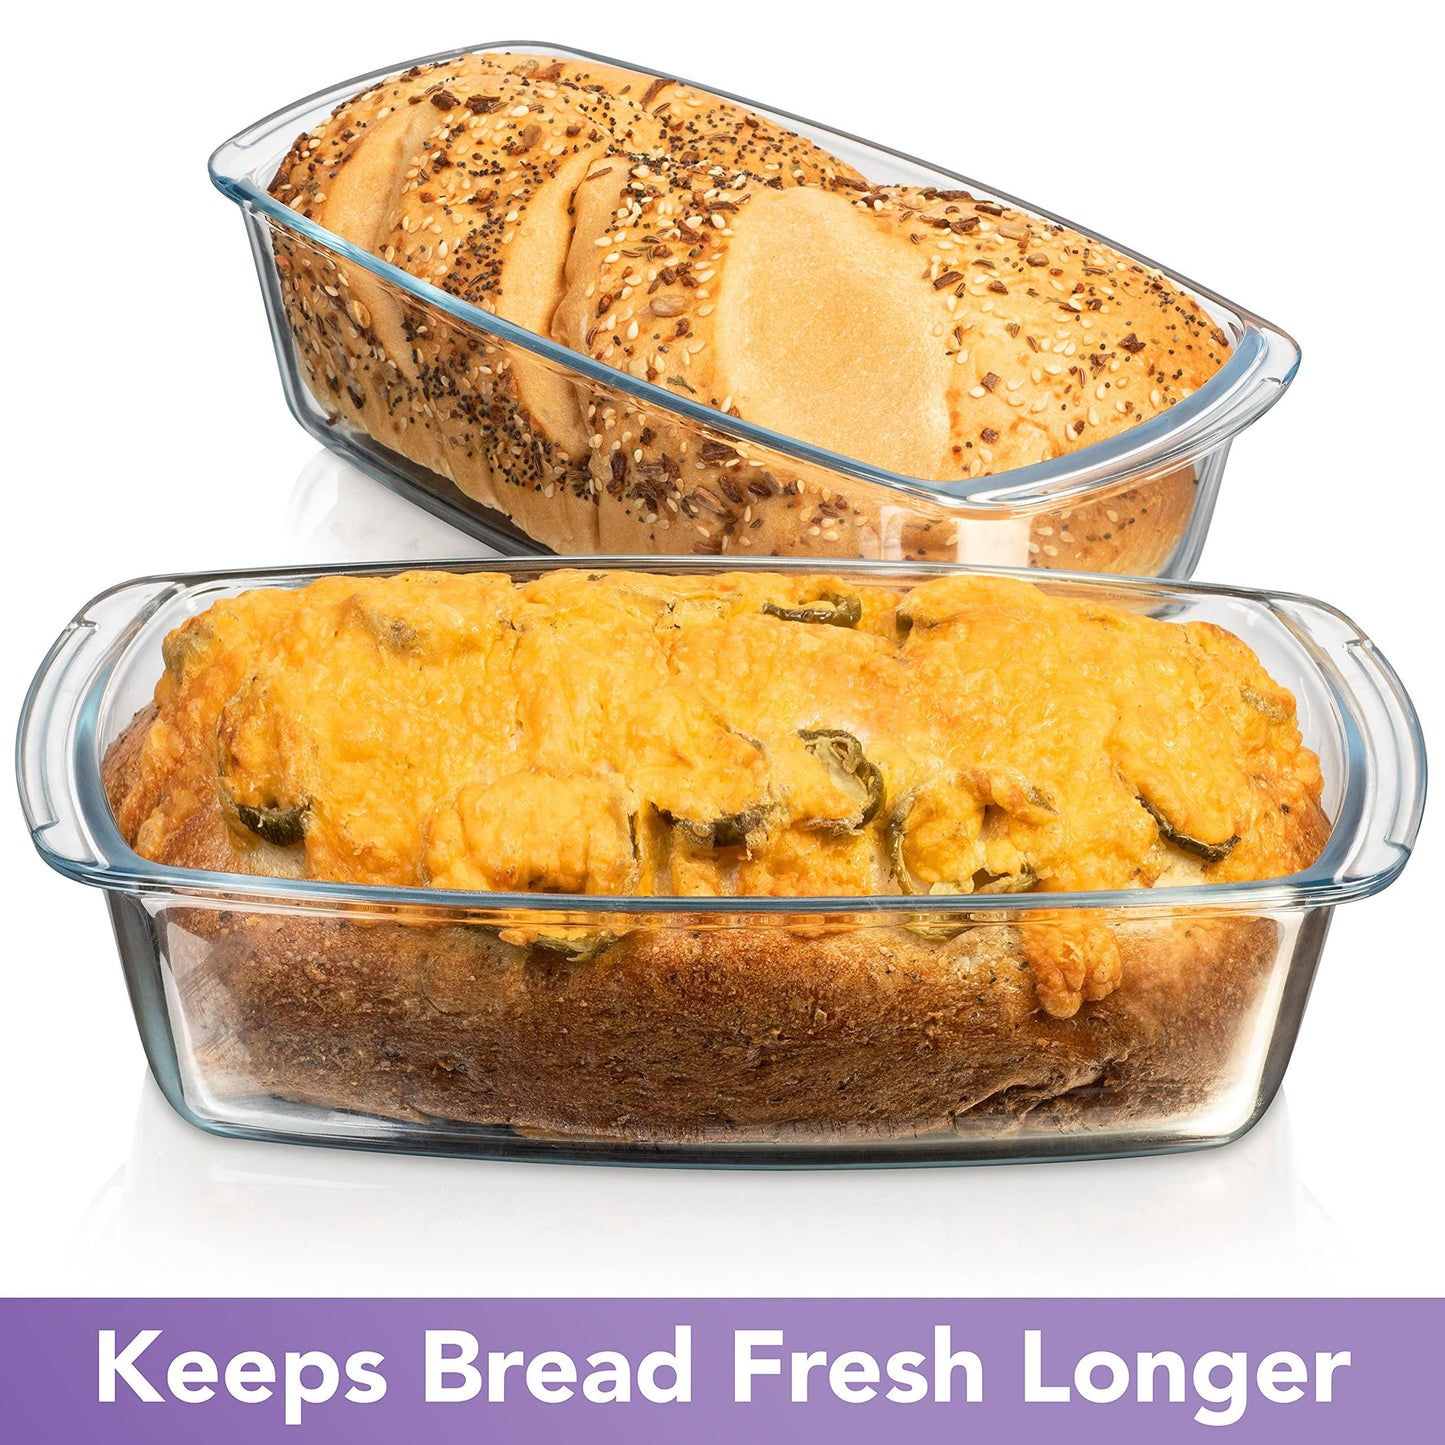 Razab LARGE 7.6 Cups/1800 ML/1.9 Qt Glass Loaf Pan with Lids (Set of 2) - Meatloaf Pan BPA free Airtight Lids Grip Handle Easy Carry, Microwave and Oven Safe - Loaf Pans For Baking Bread, Cakes - CookCave